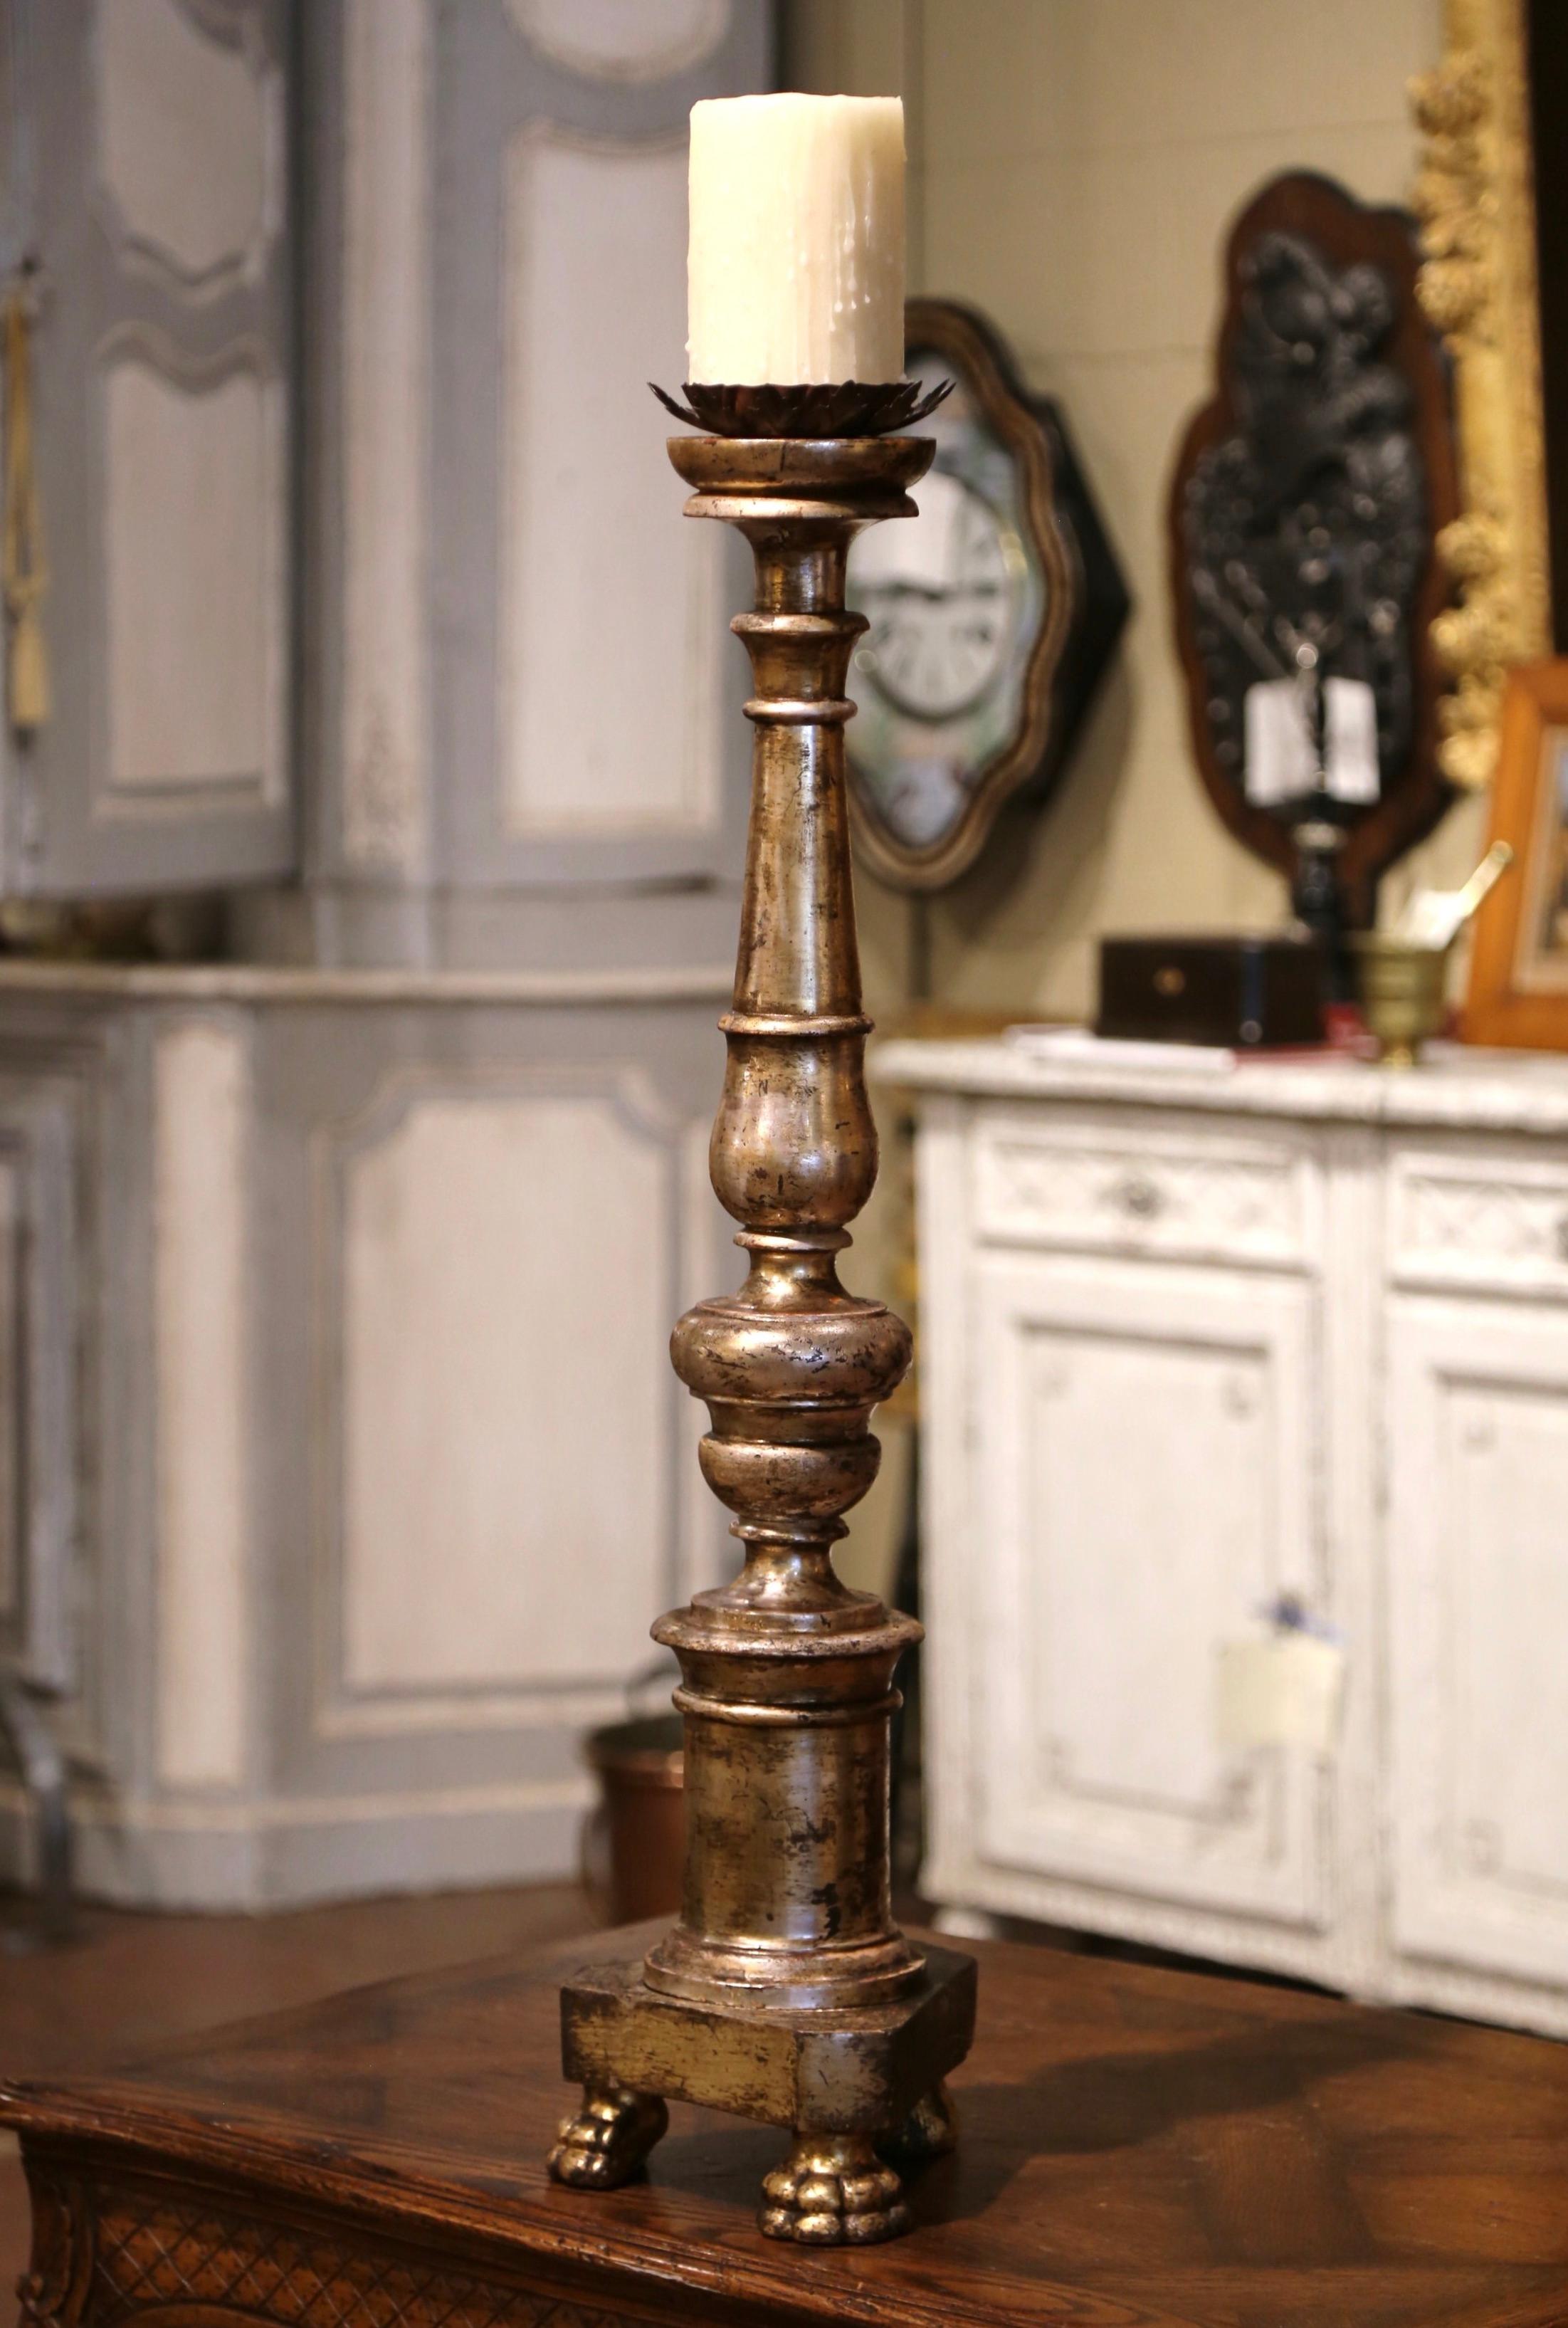 This elegant antique candle holder was created in Italy circa 1860. Standing on three paw feet over a triangular base, the tall candlestick features a carved stem dressed with a metal bobeche at the pediment. The dramatic, embellished candle holder